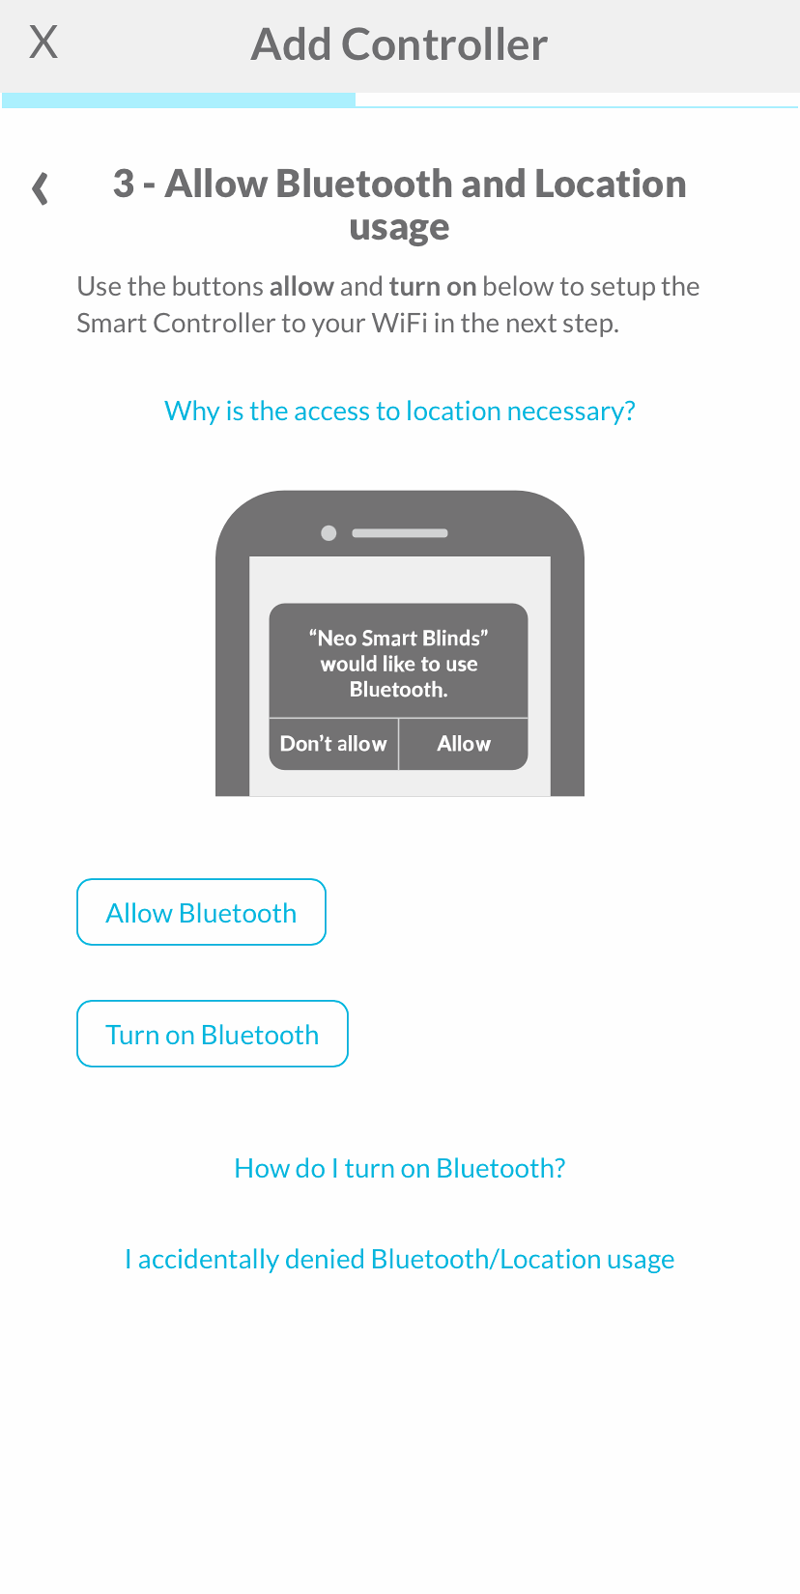 App showing two buttons, one to allow bluetooth usage and other to turn on bluetooth